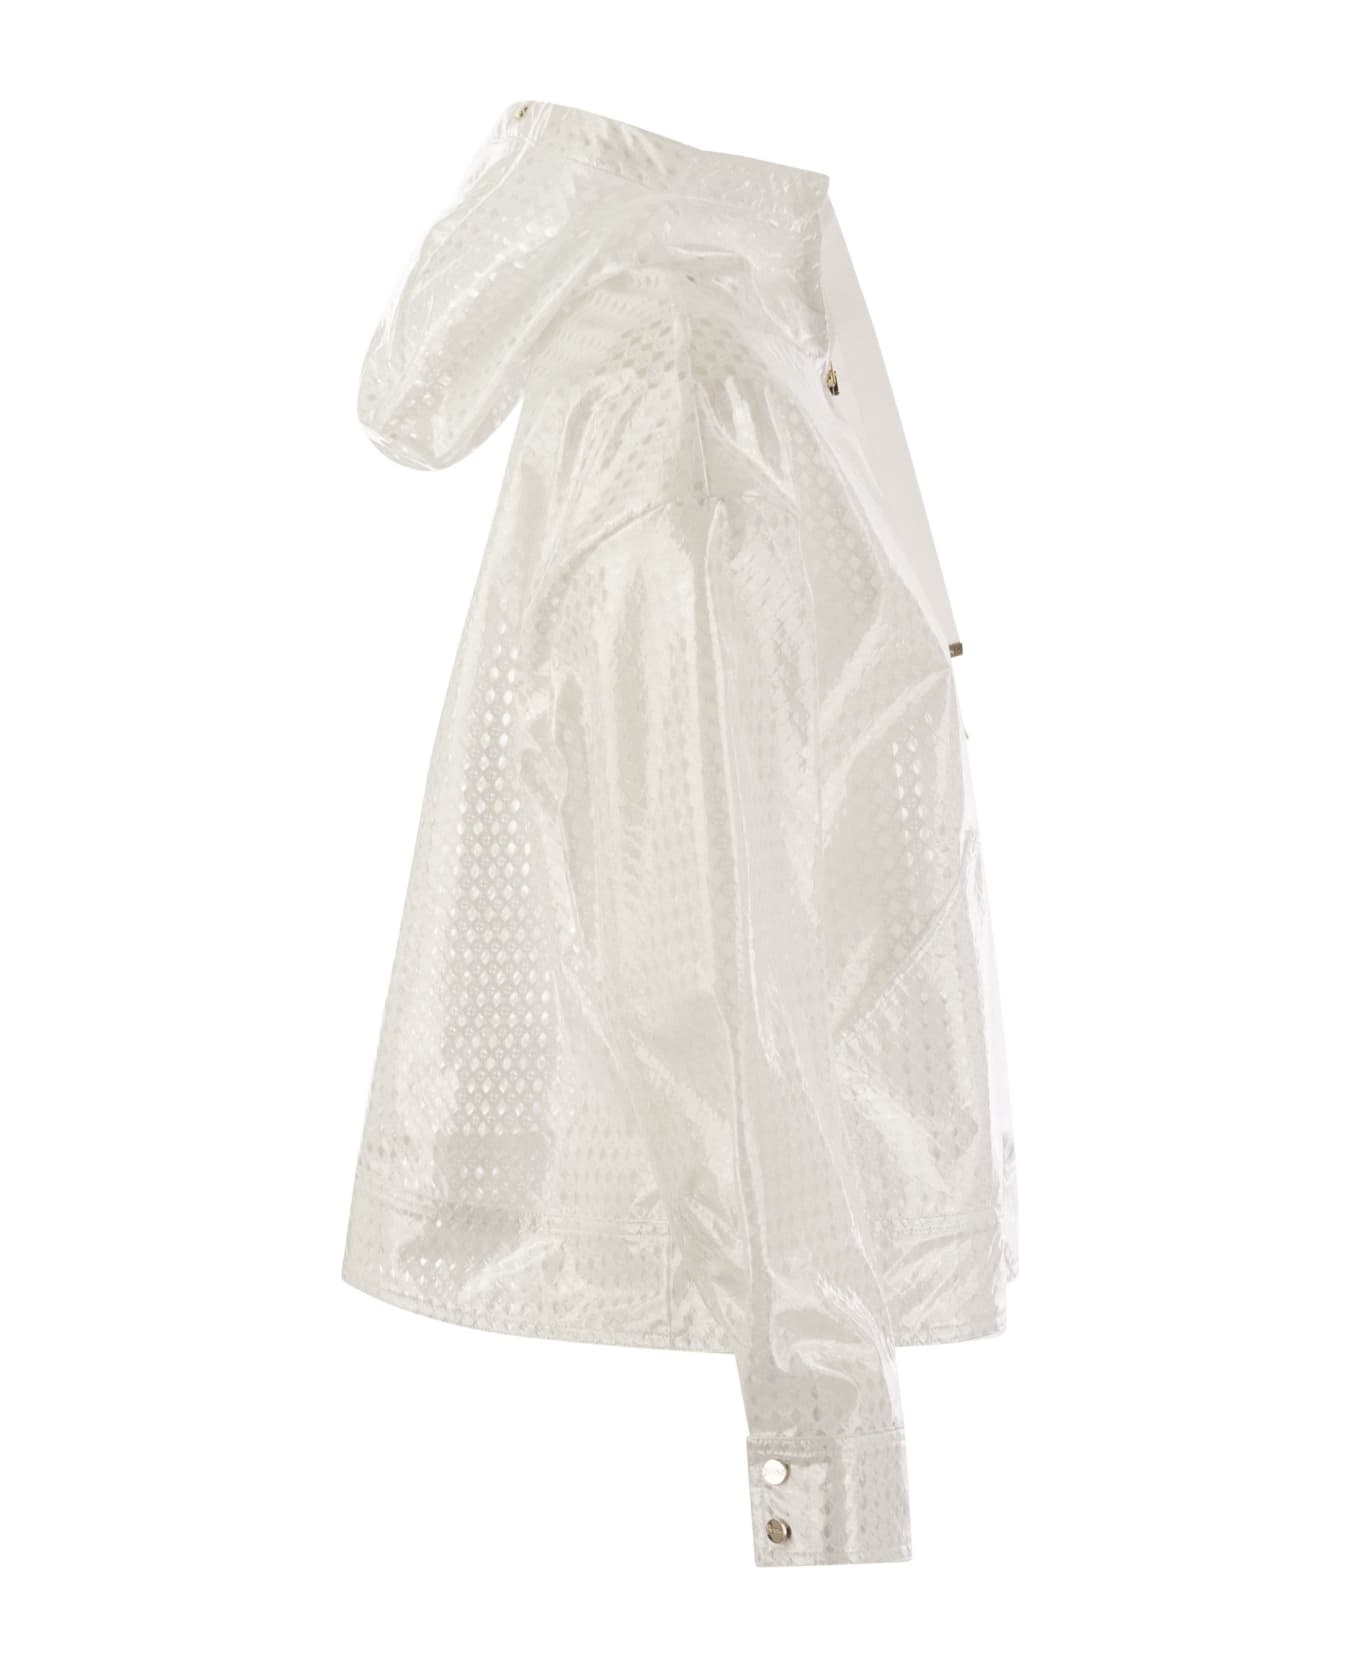 Herno A-shape In Coated Lace And Grosgrain - White ジャケット